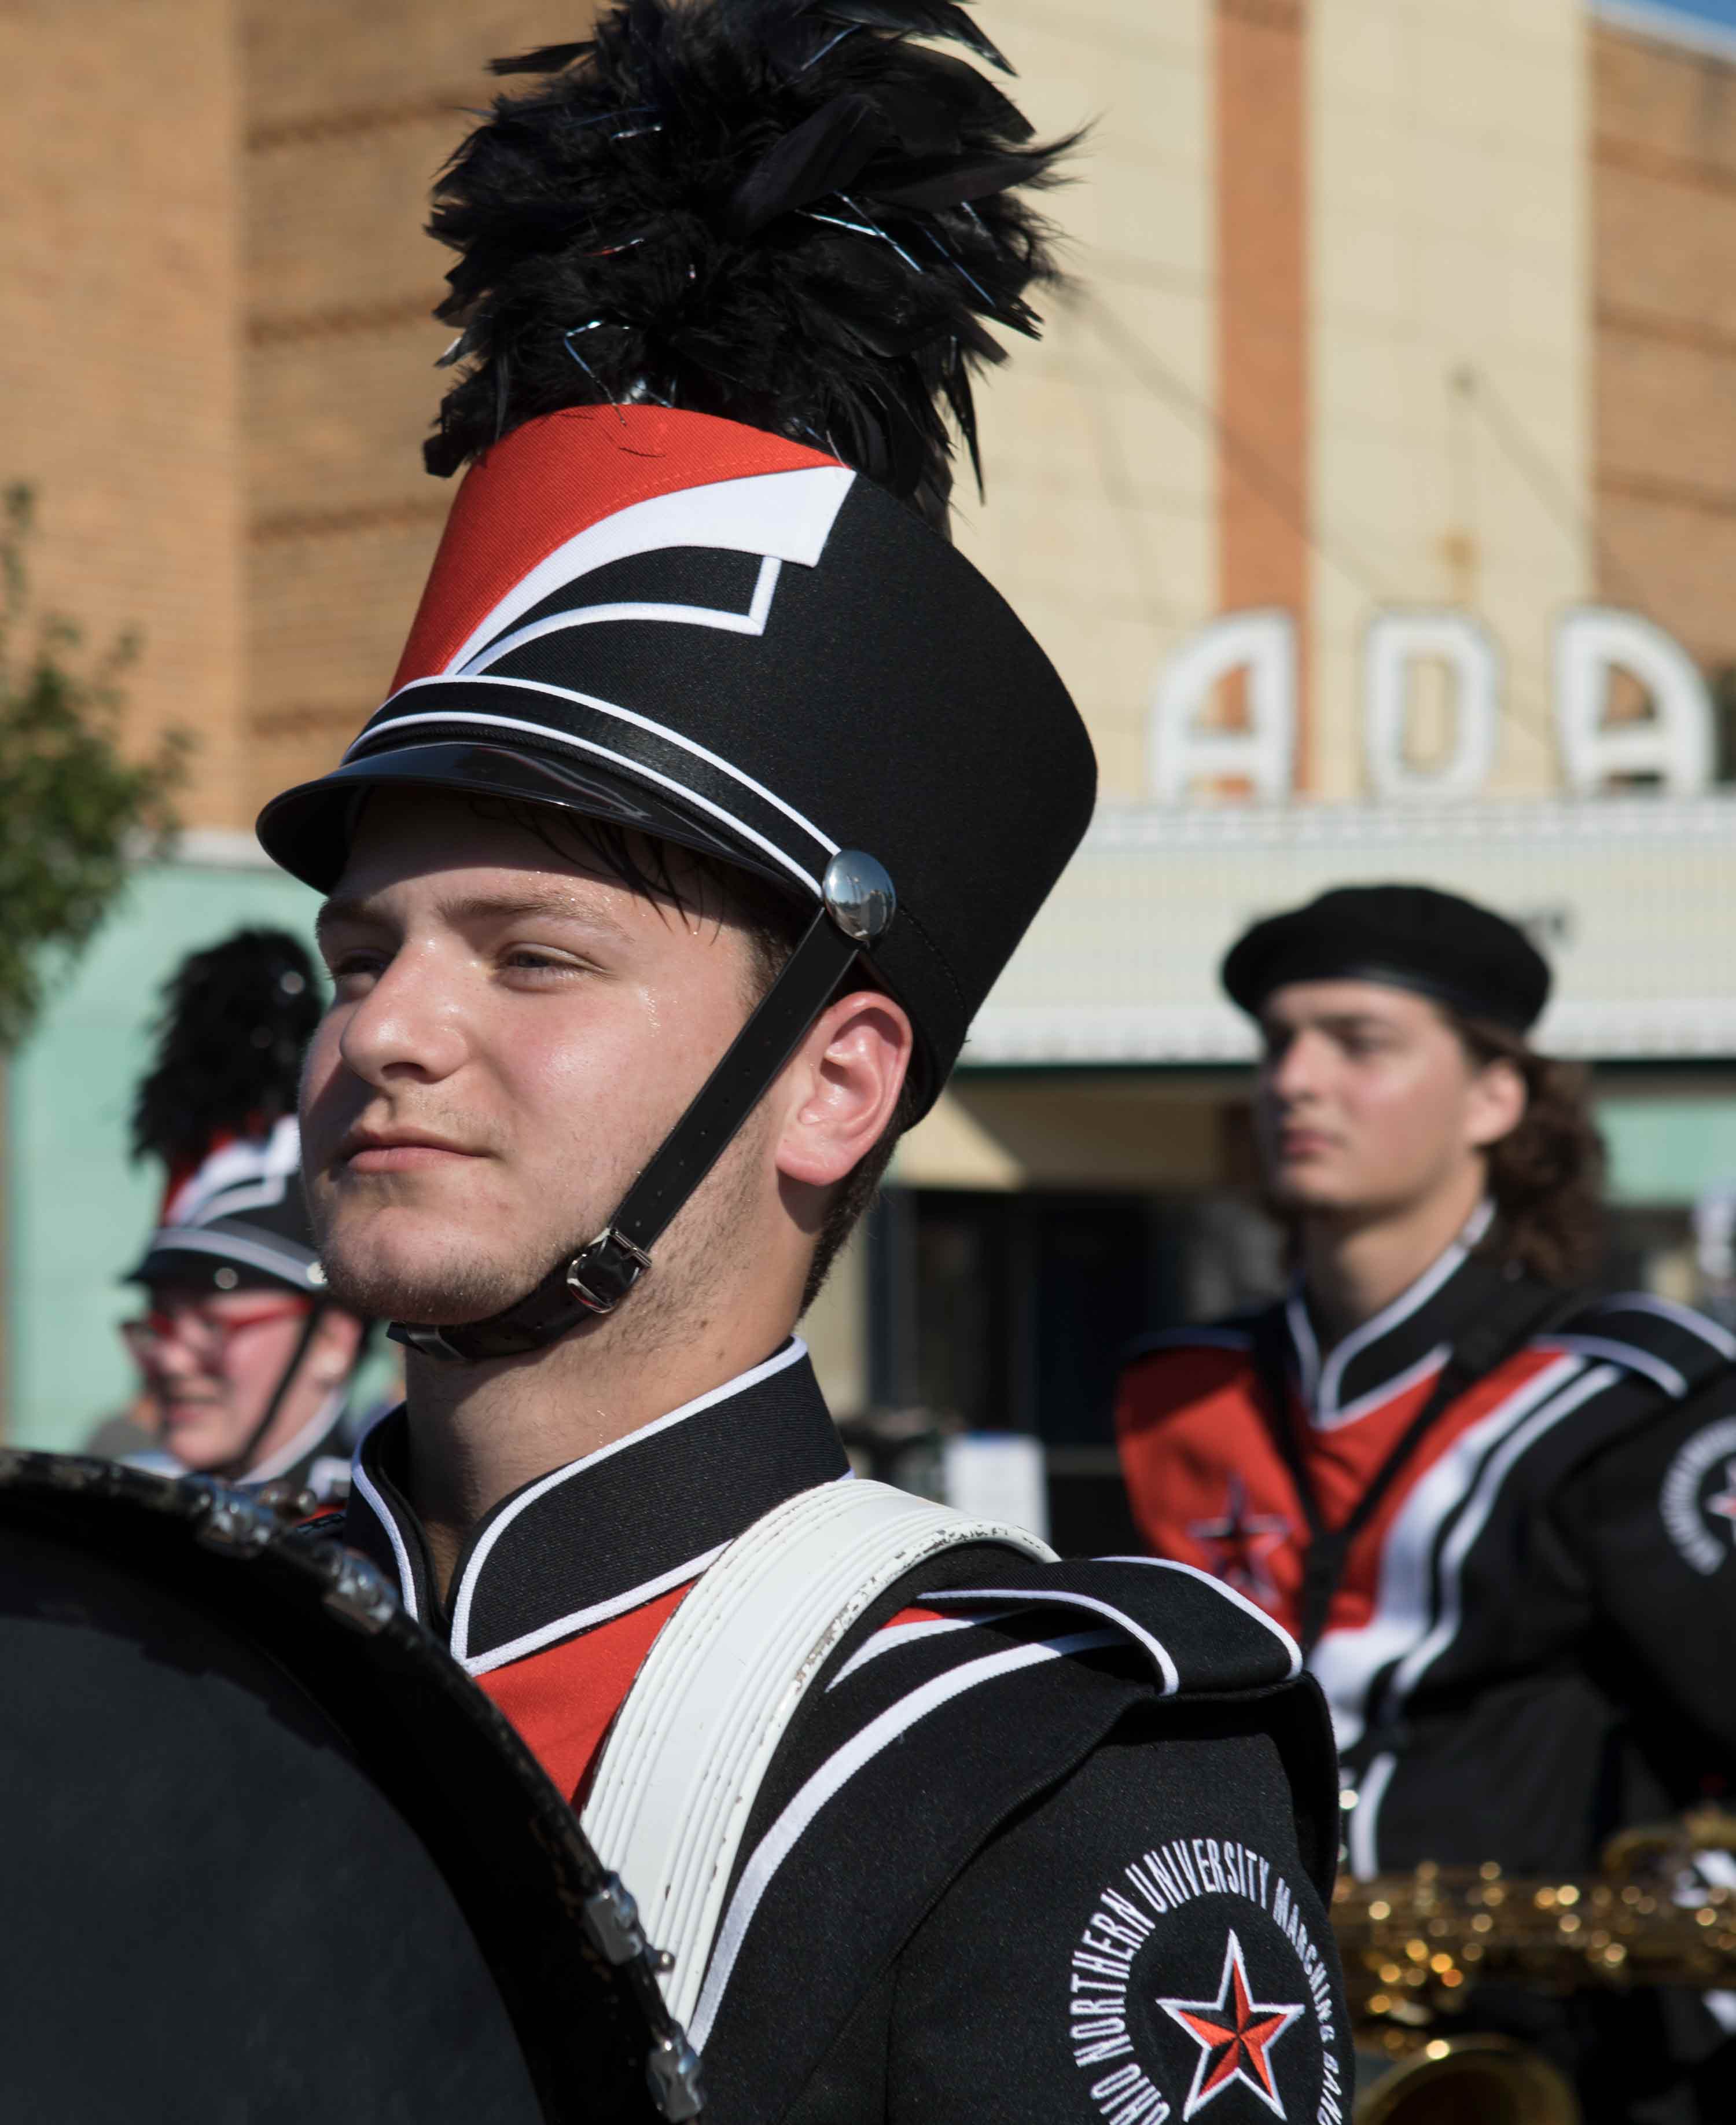 The Ohio Northern University Marching Band performs during the parade.